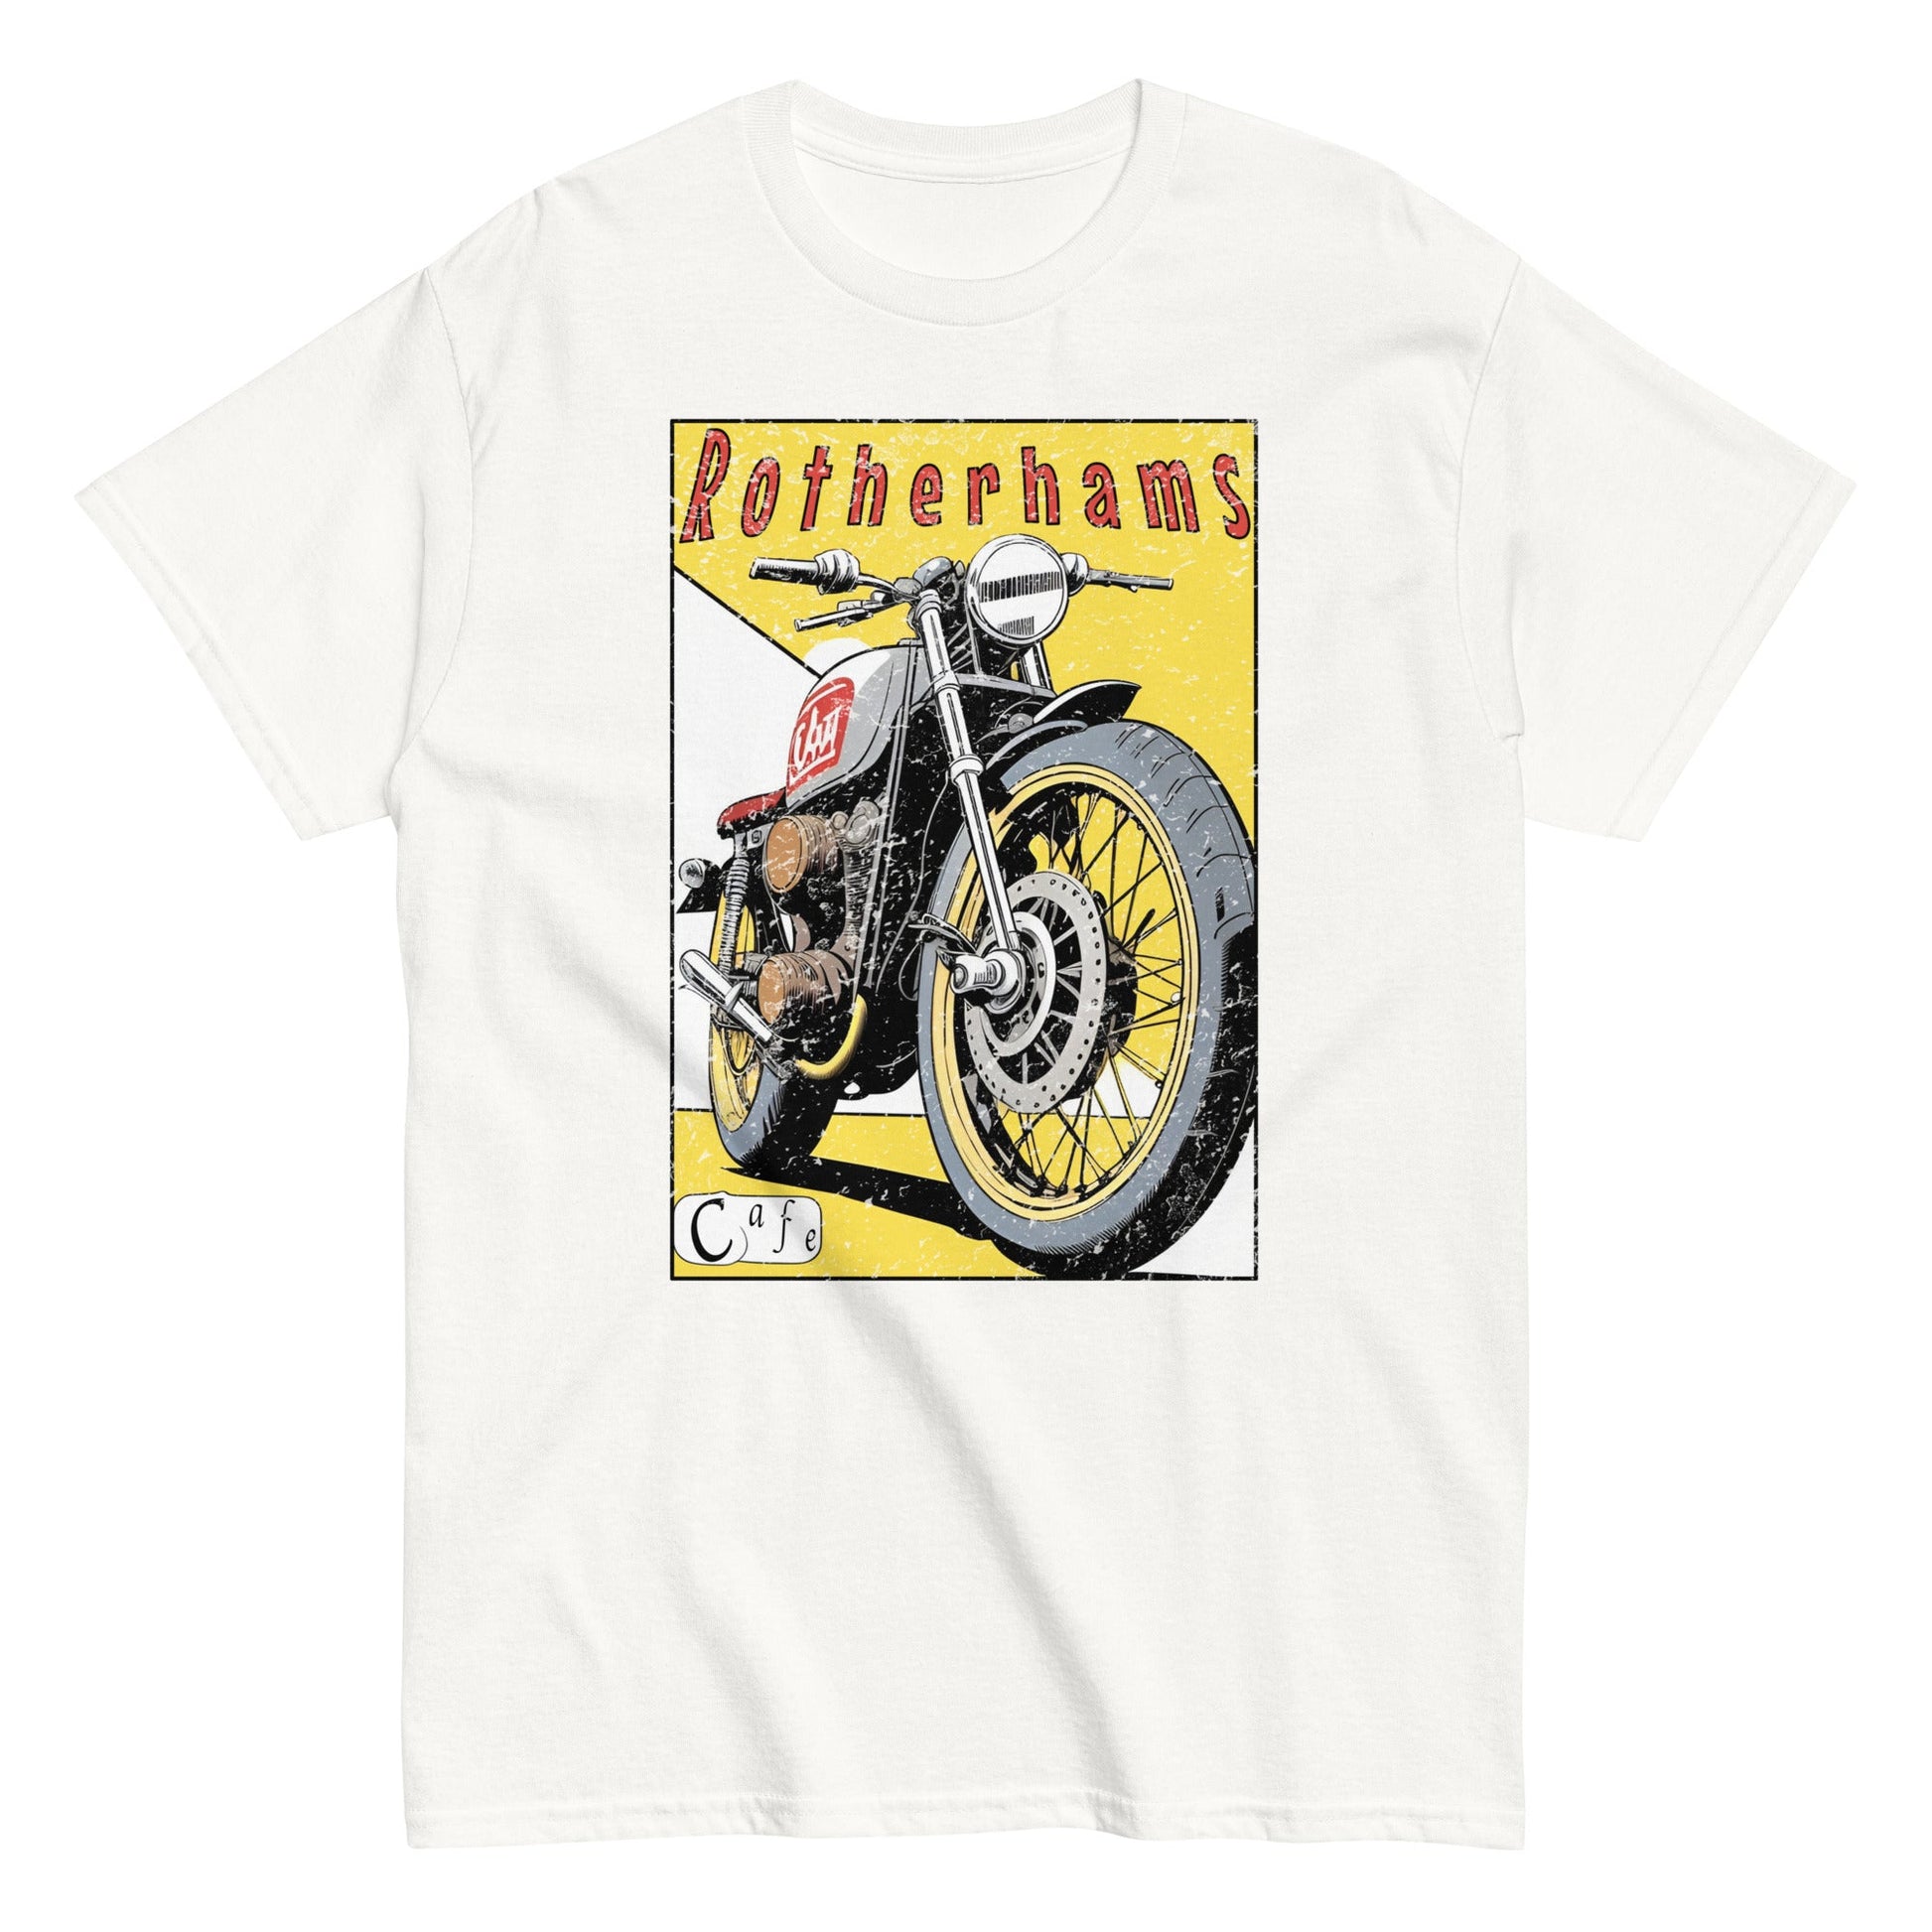 Retro Cafe Racer Motorcycle T-Shirt | Rotherhams (White) - Rotherhams